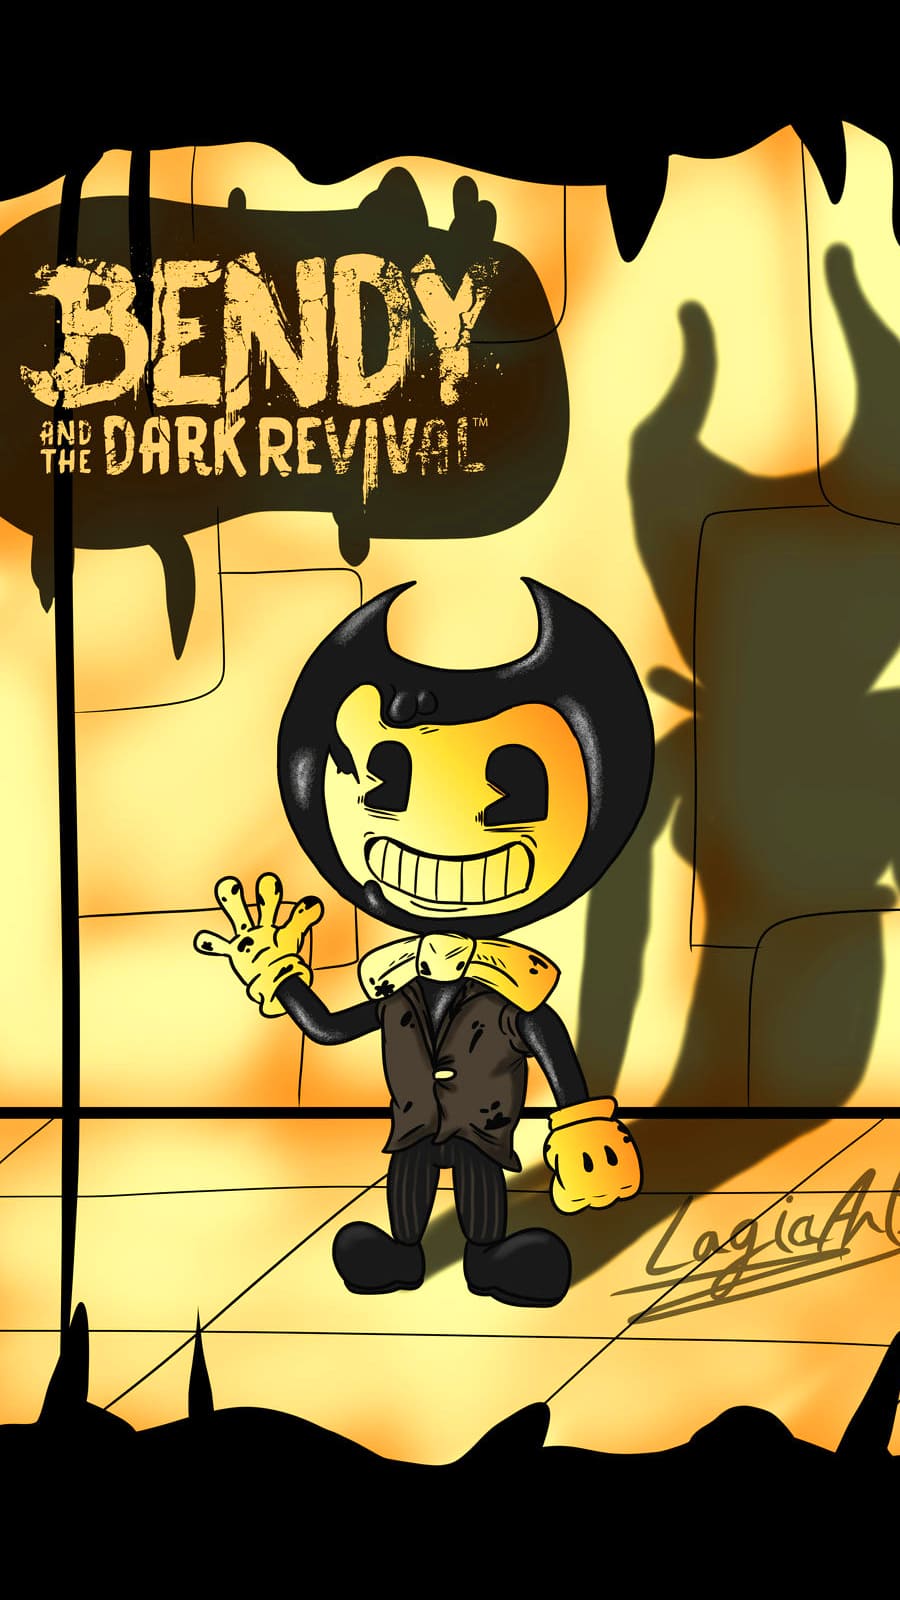 Bendy and The Dark Revival by Hebacat on DeviantArt